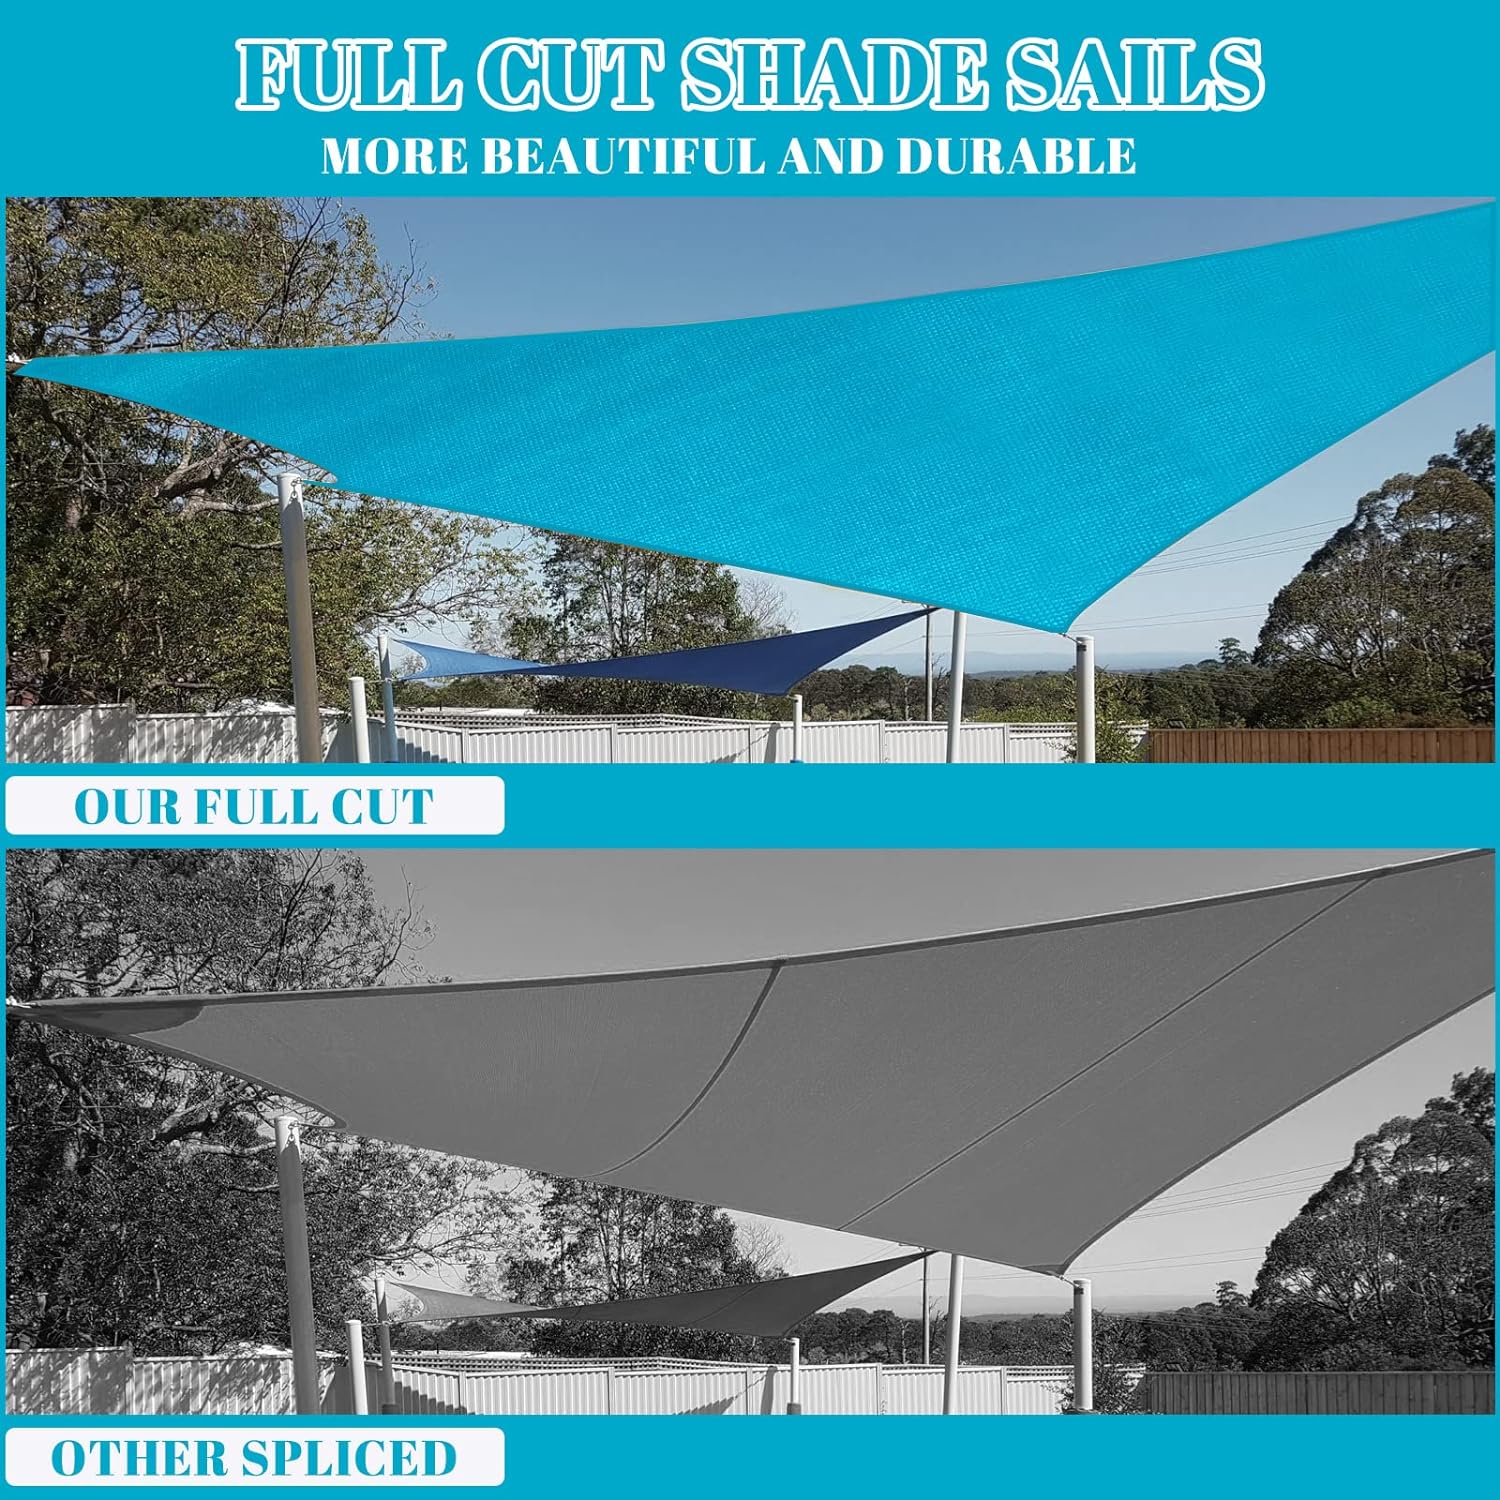 Cool Area Sun Shade Sail: Stay Cool and Protected in Style